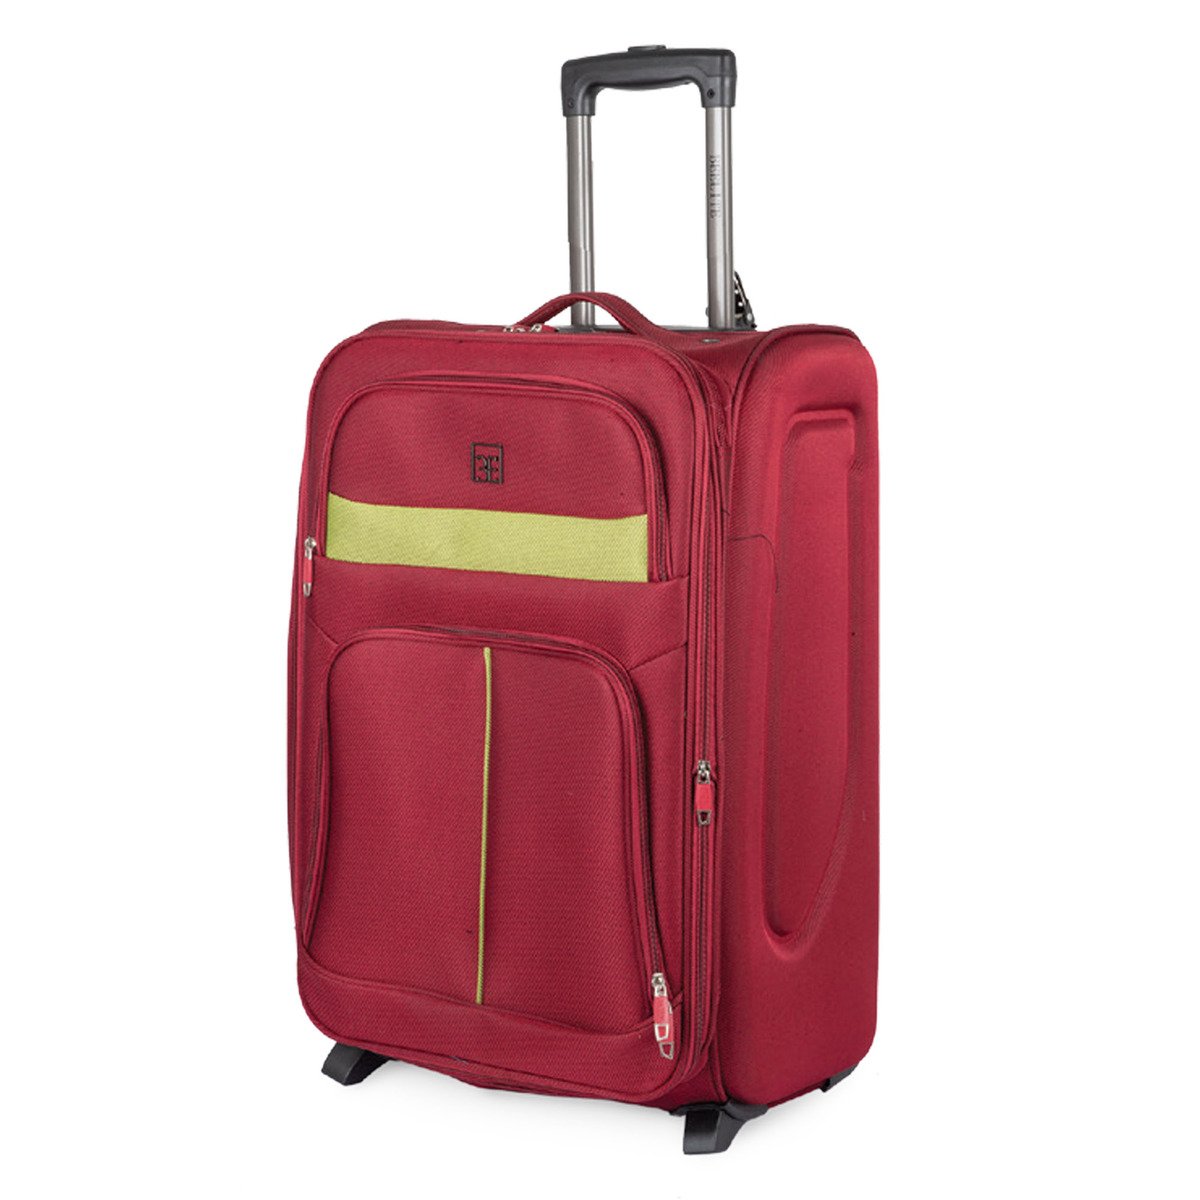 Beelite Soft Trolley FT0089 24inch Assorted Colors